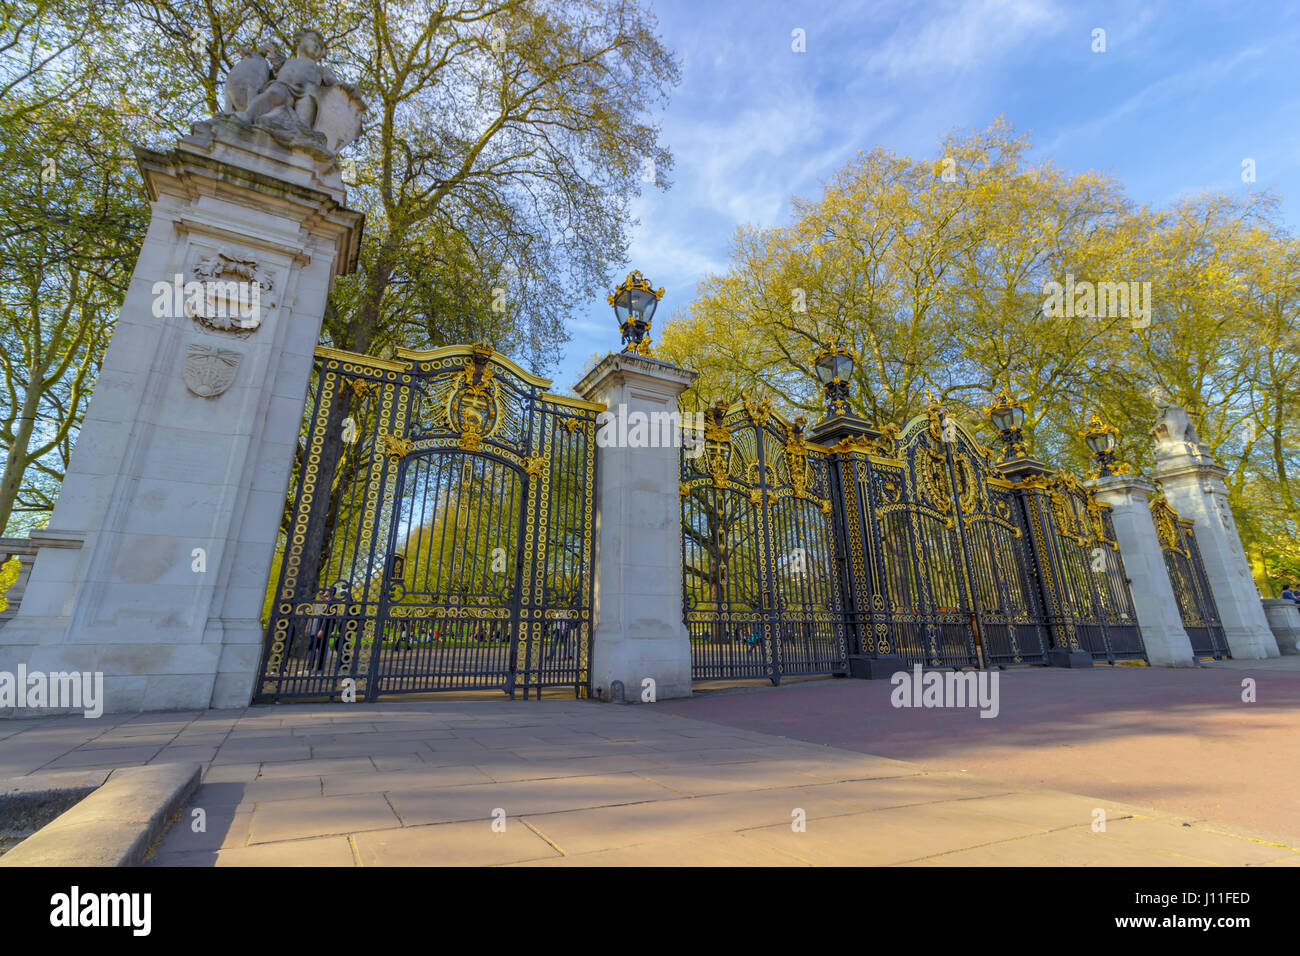 London, England - 9th of April 2017: Tourists behind Canada Gates near Buckingham Palace in London. Stock Photo